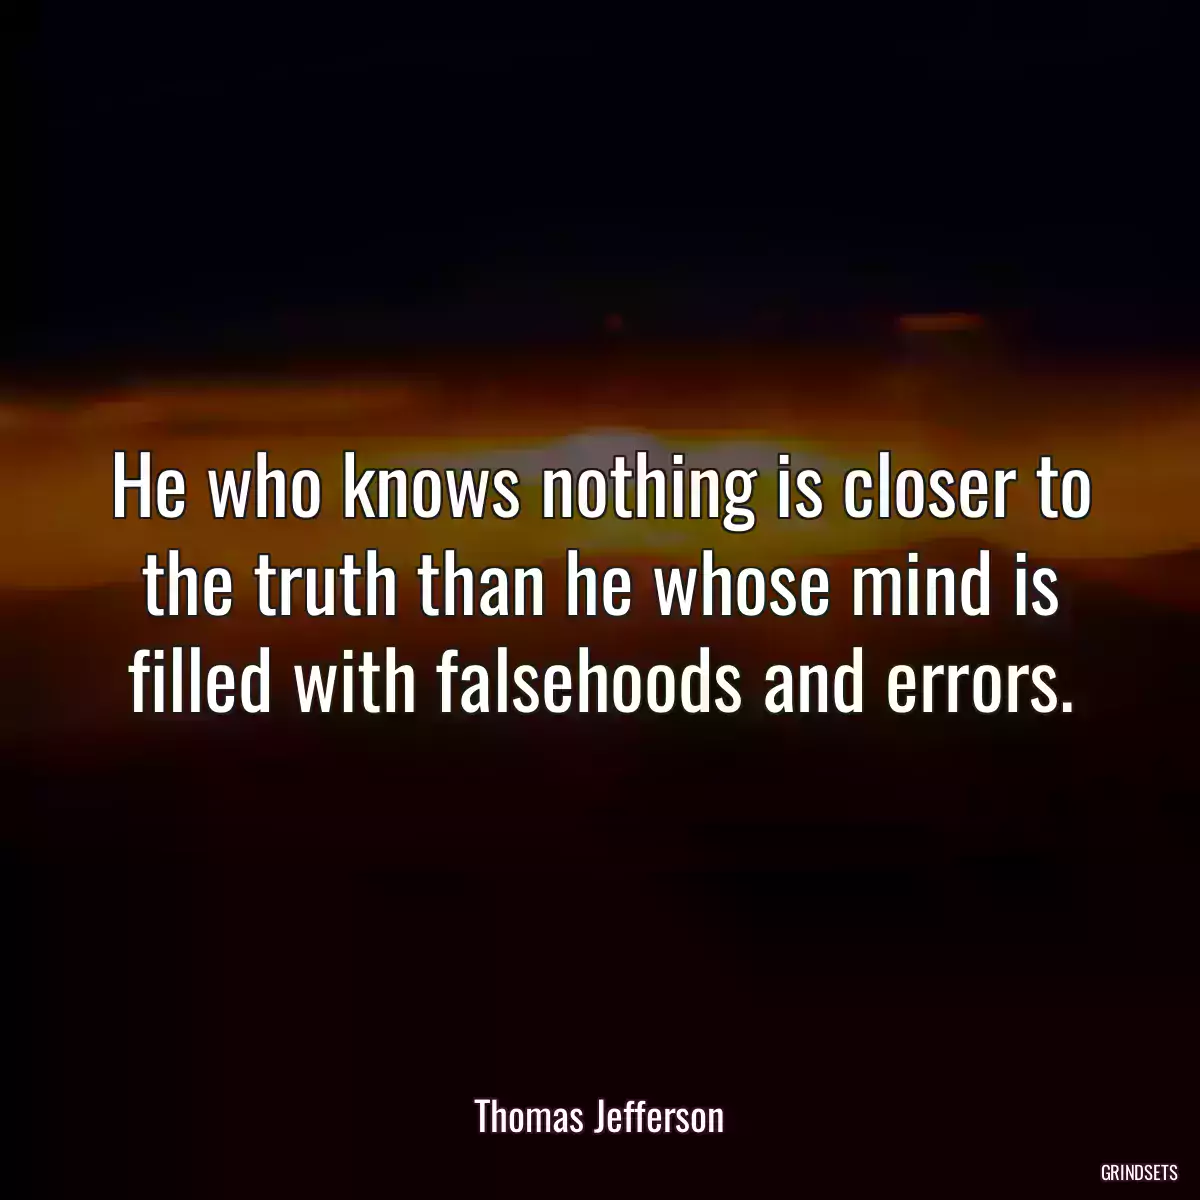 He who knows nothing is closer to the truth than he whose mind is filled with falsehoods and errors.